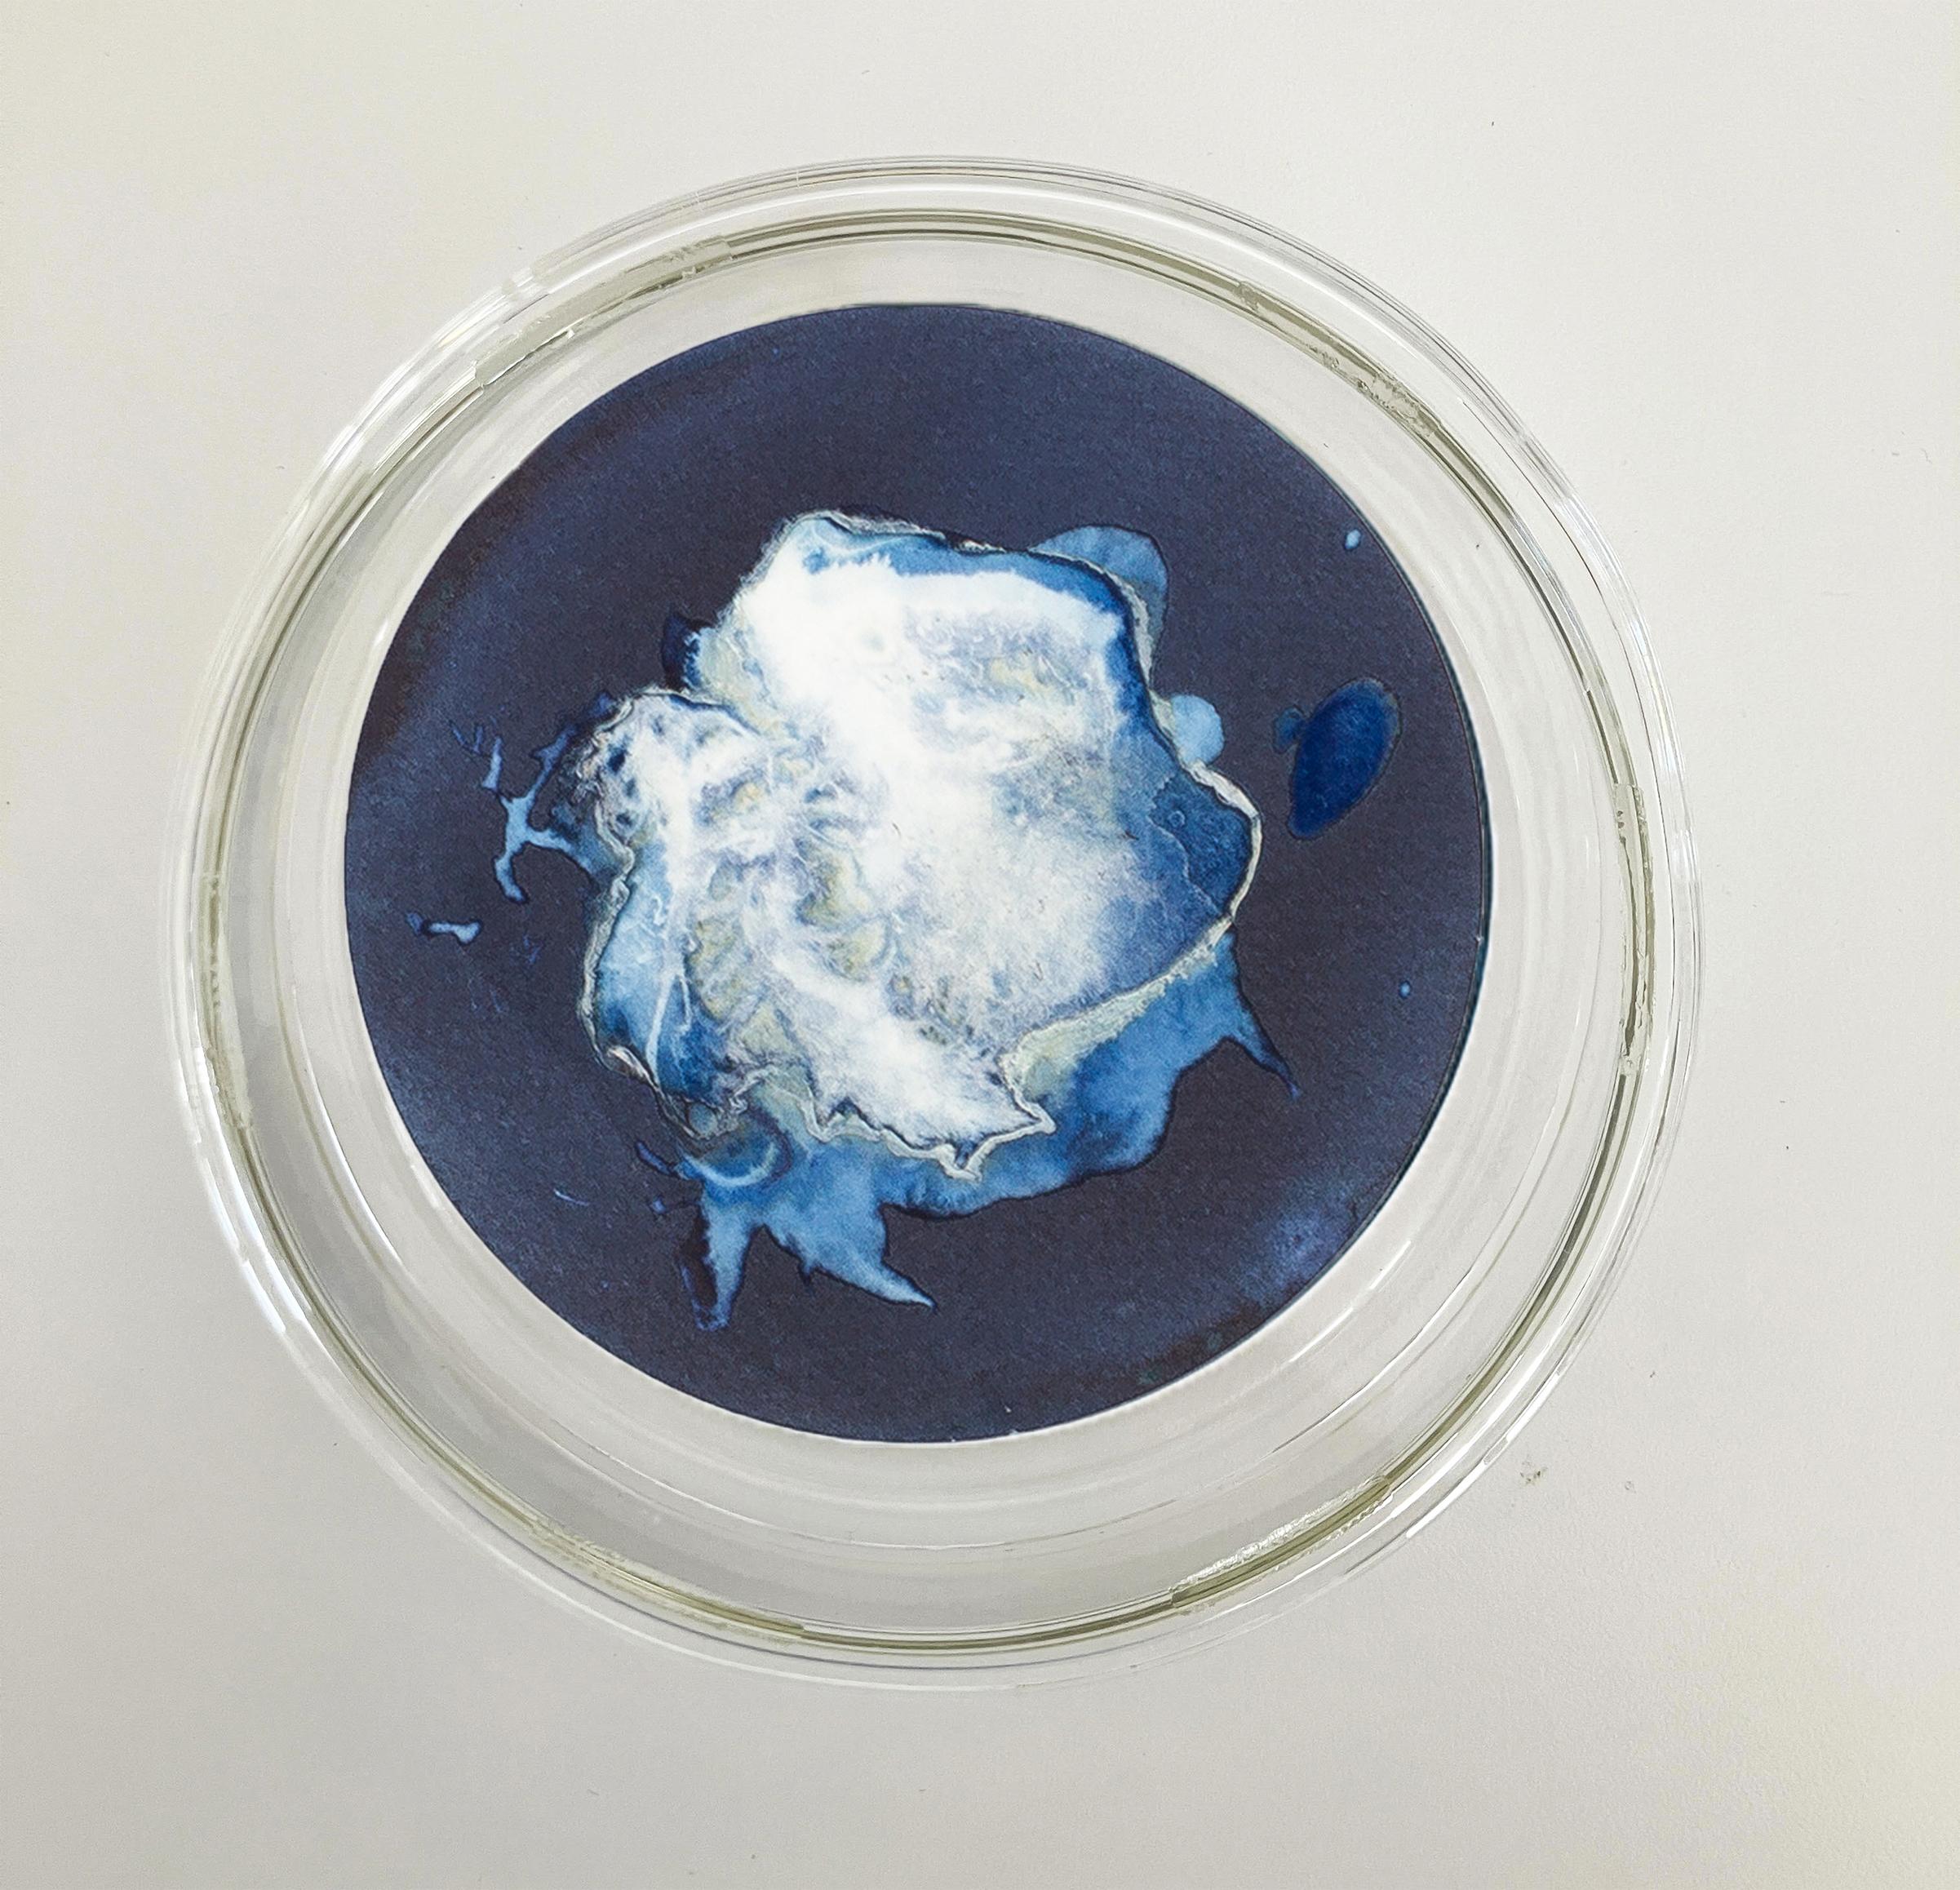 Medusas 11, 12 y 13. Cyanotype photograhs mounted in high resistance glass dish - Sculpture by Paola Davila